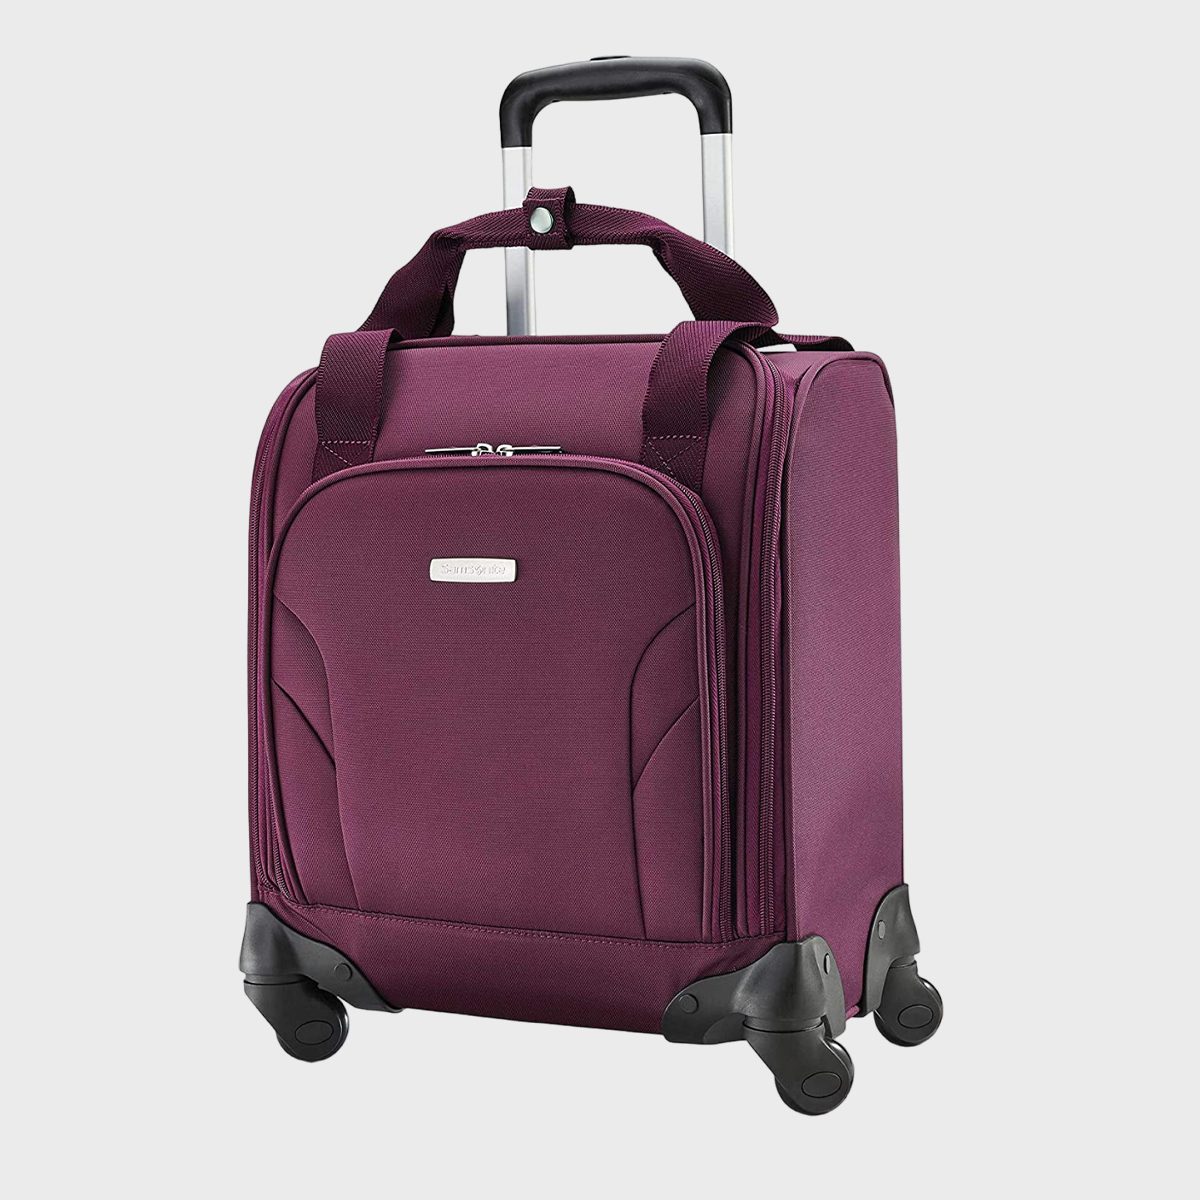 <h3>Samsonite Underseat Carry-On Spinner</h3> <p>As its name suggests, this <a href="https://www.amazon.com/Samsonite-Underseat-Spinner-Port-Purple/dp/B07H8SWKPC/" rel="noopener">soft-sided luggage from Samsonite</a> easily slides under your <a href="https://www.rd.com/list/best-airplane-seats/" rel="noopener noreferrer">airplane seat</a>. Its best feature, however, is the built-in USB port, which allows for seamless on-the-go charging. The exterior pockets—located on the front and side—are perfect for storing smaller items (i.e., your wallet, ID, credit cards and keys). Meanwhile, the main compartment boasts a padded compartment for your laptop or other tech devices.</p> <p>There are nearly 4,000 five-star Amazon reviews that rave about this<a href="https://www.rd.com/list/underseat-luggage/"> underseat luggage</a>. "I was skeptical that this rolling carry-on would actually fit under the seat in front of me in first class and was much pleased that it did even when three-quarters full," writes verified purchaser <a href="https://www.amazon.com/gp/customer-reviews/R3UHSMNCHFS9I5/" rel="noopener">David P. Cole</a>. "The key is to place it with rollers pointing toward you."</p> <p><strong>Pros</strong></p> <ul> <li>Compact size easily fits under the airplane seat</li> <li>Built-in USB port</li> <li>360-degree spinner wheels</li> <li>Ergonomic push-button locking handle</li> <li>Smart sleeve on back fits over most luggage pieces</li> </ul> <p><strong>Cons</strong></p> <ul> <li>Not as big as traditional carry-on bags</li> </ul> <p class="listicle-page__cta-button-shop"><a class="shop-btn" href="https://www.amazon.com/Samsonite-Underseat-Spinner-Port-Purple/dp/B07H8SWKPC/">Shop Now</a></p>  <h2>How we found the best carry-on luggage</h2> <p><span><span>As shopping experts, our</span> <span>only</span><span> job</span><span> is to help you find a winning product. We start with the</span> <span>research and reporting </span><span>basics—what products are made </span><span>of,</span><span> what they look like and how much they cost—to ensure that </span><span>we’re</span><span> only recommending the buys that are worth your time</span> <span>and money</span><span>.</span><span> Then, we research the features that speak to the product’s quality, taking advice from industry insiders and subject matter experts on what makes a product a </span><span>smart</span> <span>value (or worthy of a splurge). Finally, we do the work of combing through user reviews to see how real people interact with the product, and if it stands up to the test.</span> </span> </p> <h2>FAQ</h2> <h3>What kind of carry-on luggage is best?</h3> <p>When it comes to the best carry-on luggage, the options are plentiful. Consumers can choose from <a href="https://www.rd.com/list/hard-shell-luggage/">hard shell luggage</a>, <a href="https://www.rd.com/list/best-soft-sided-luggage/">soft-sided suitcases</a>, underseat bags (which—you guessed it—are small enough to fit under the airplane seat), duffel bags (some with wheels, some handheld) and <a href="https://www.rd.com/list/best-travel-backpack/">travel backpacks</a> (which offer hands-free convenience). Ultimately, the choice is yours—though you should consider if you're <a href="https://www.rd.com/list/what-to-pack-for-a-cruise/">packing for a cruise</a>, long trip or short excursion.</p> <h3>What is a good carry-on luggage size?</h3> <p>Before choosing the best luggage carry-on size for you, there are a few things to consider. For example, if you're an over-packer (no judgment!) or have a longer trip coming up on the horizon, you may opt for an expandable bag. However, if you tend to pack fewer belongings—or have a shorter trip planned—then an underseat bag or duffle may work best. Also, keep in mind that each airline has different <a href="https://www.rd.com/article/size-of-carry-on-luggage/">carry-on size restrictions</a>.</p> <p><strong>Stop hunting for the best products and deals—get our expert scoop on secret sales and discounts, gift ideas for everyone and can’t-miss products. Sign up for the </strong><a href="https://www.rd.com/newsletter/?" rel="noopener"><strong>Stuff We Love newsletter</strong></a><strong>.</strong></p>